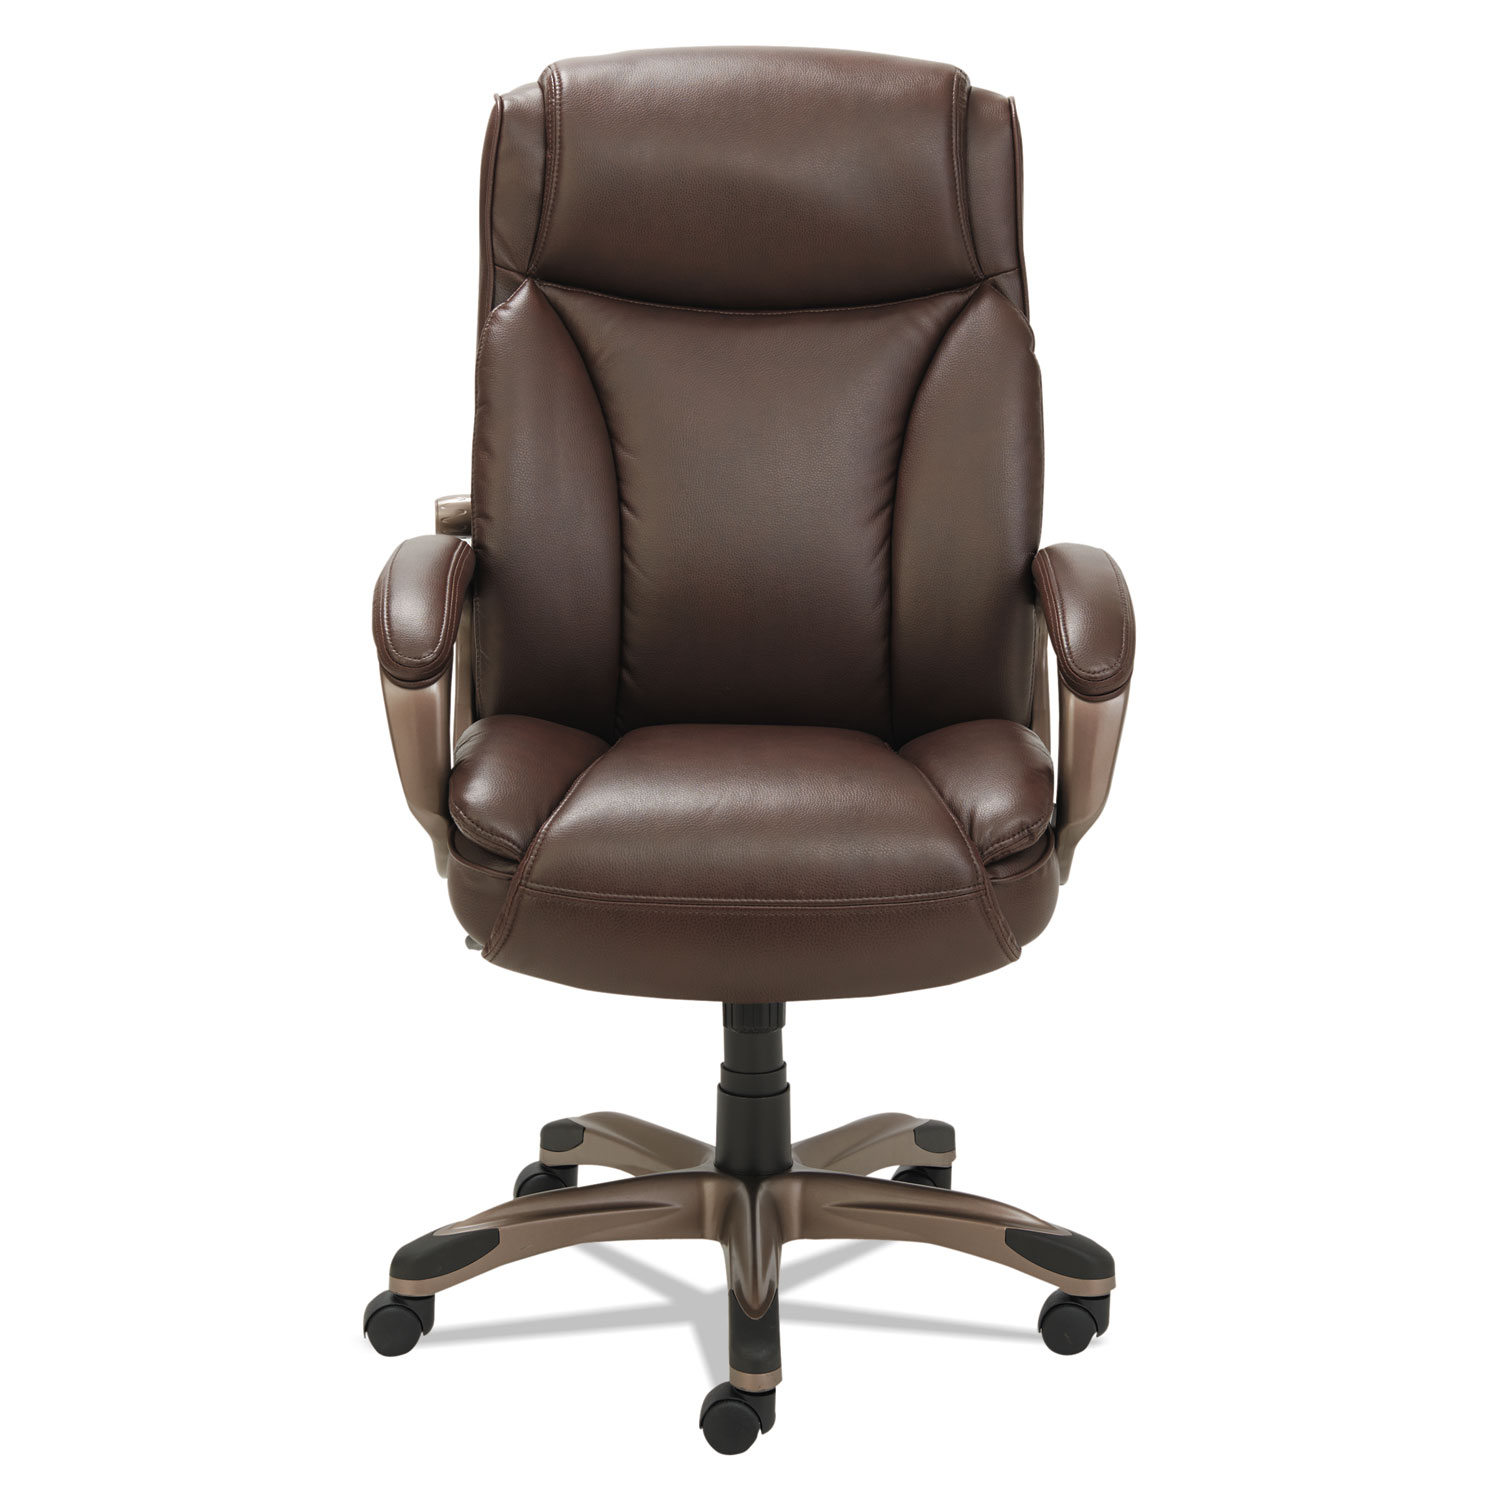 Alera Veon Series Executive HighBack Leather Chair, Coil Spring Cushioning,Brown